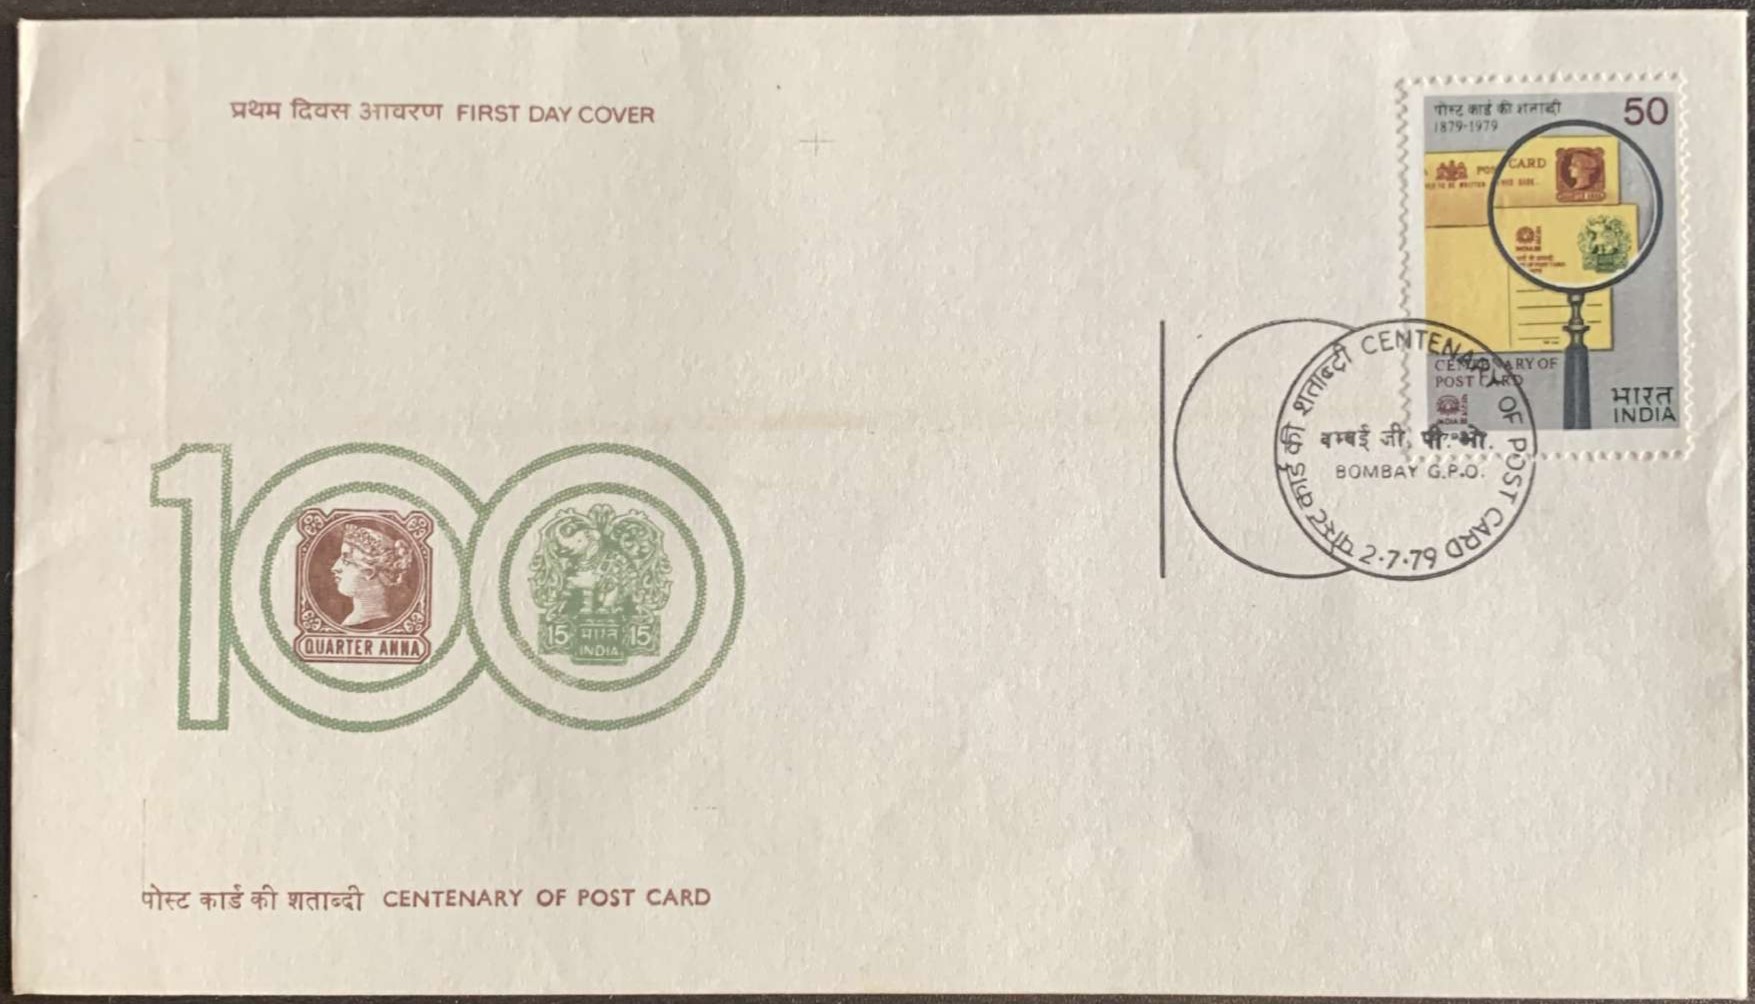 India 1979 Centenary of Post Card First Day Cover